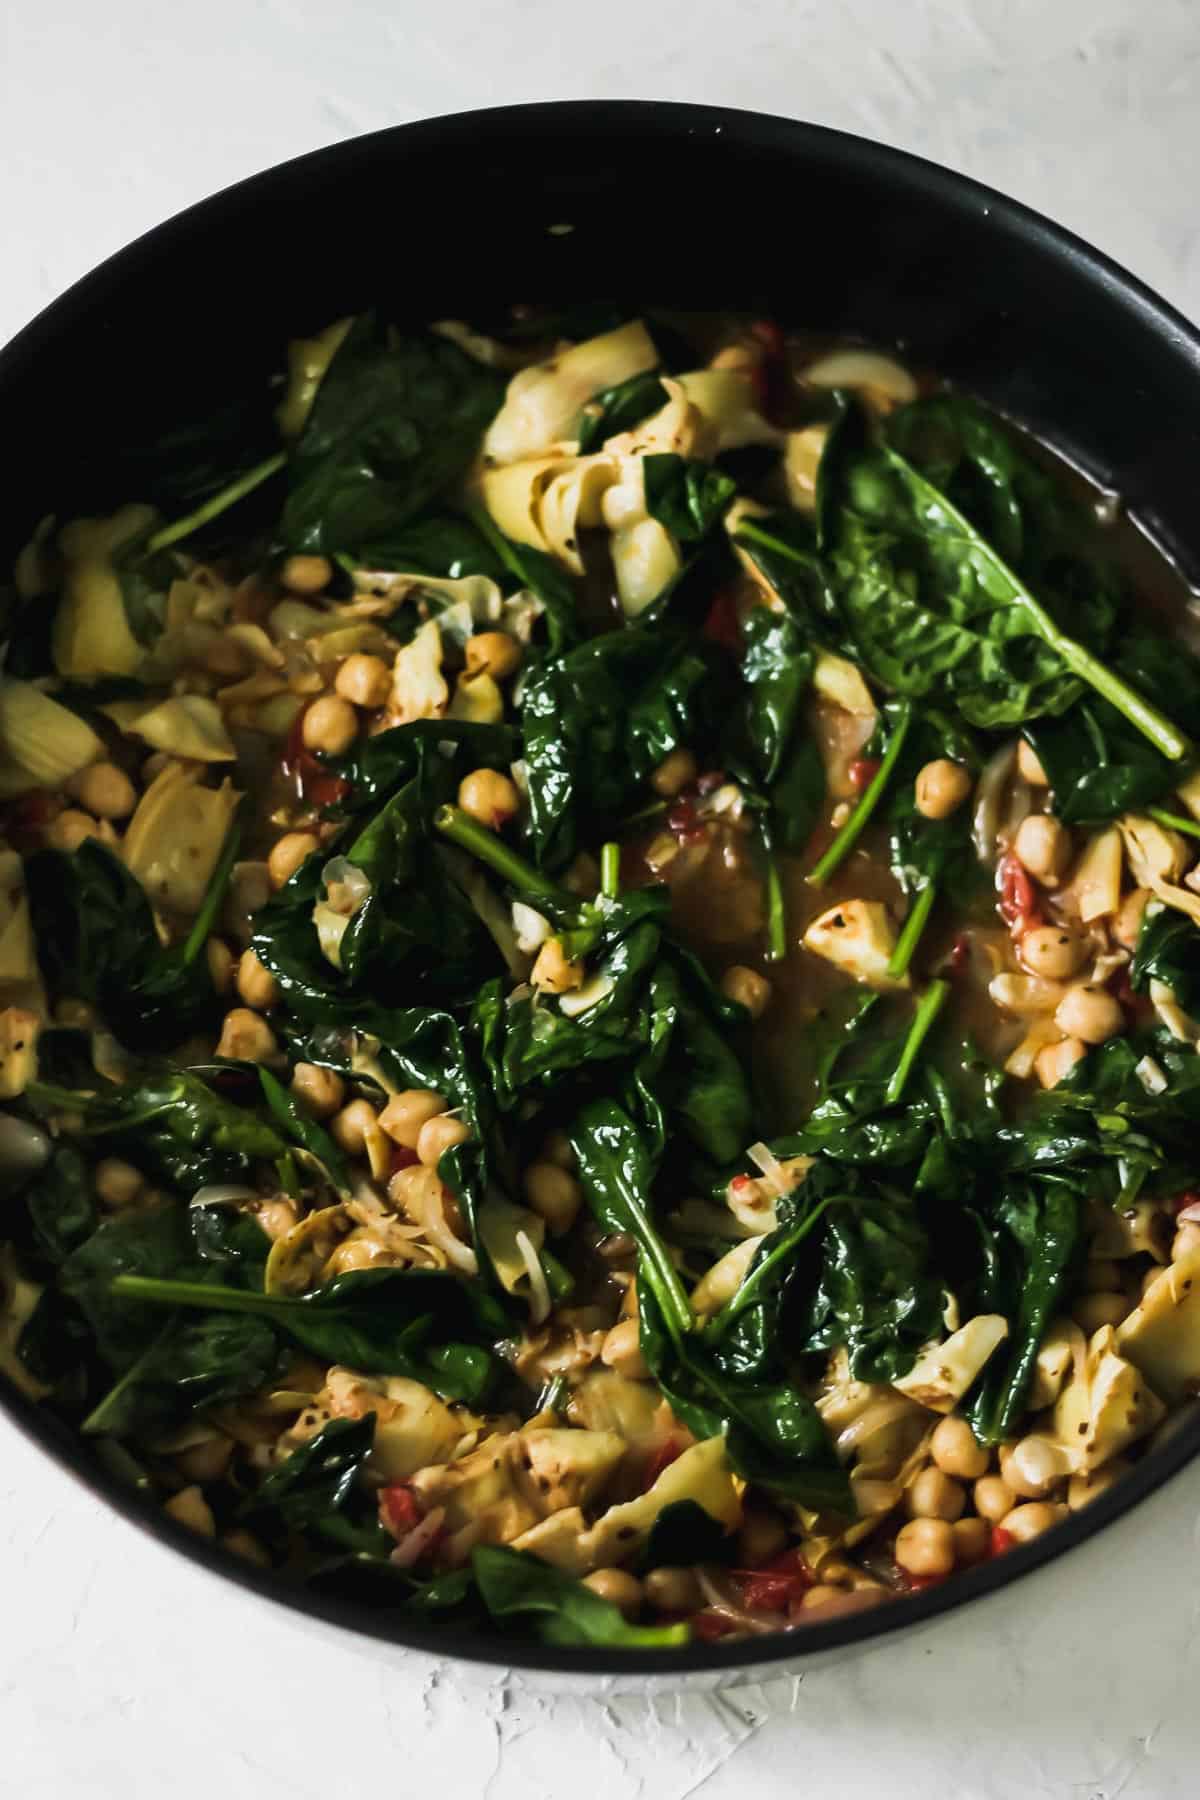 Olive oil, garlic, shallots, tomatoes, garbanzo beans, and spinach in a high sided skillet.